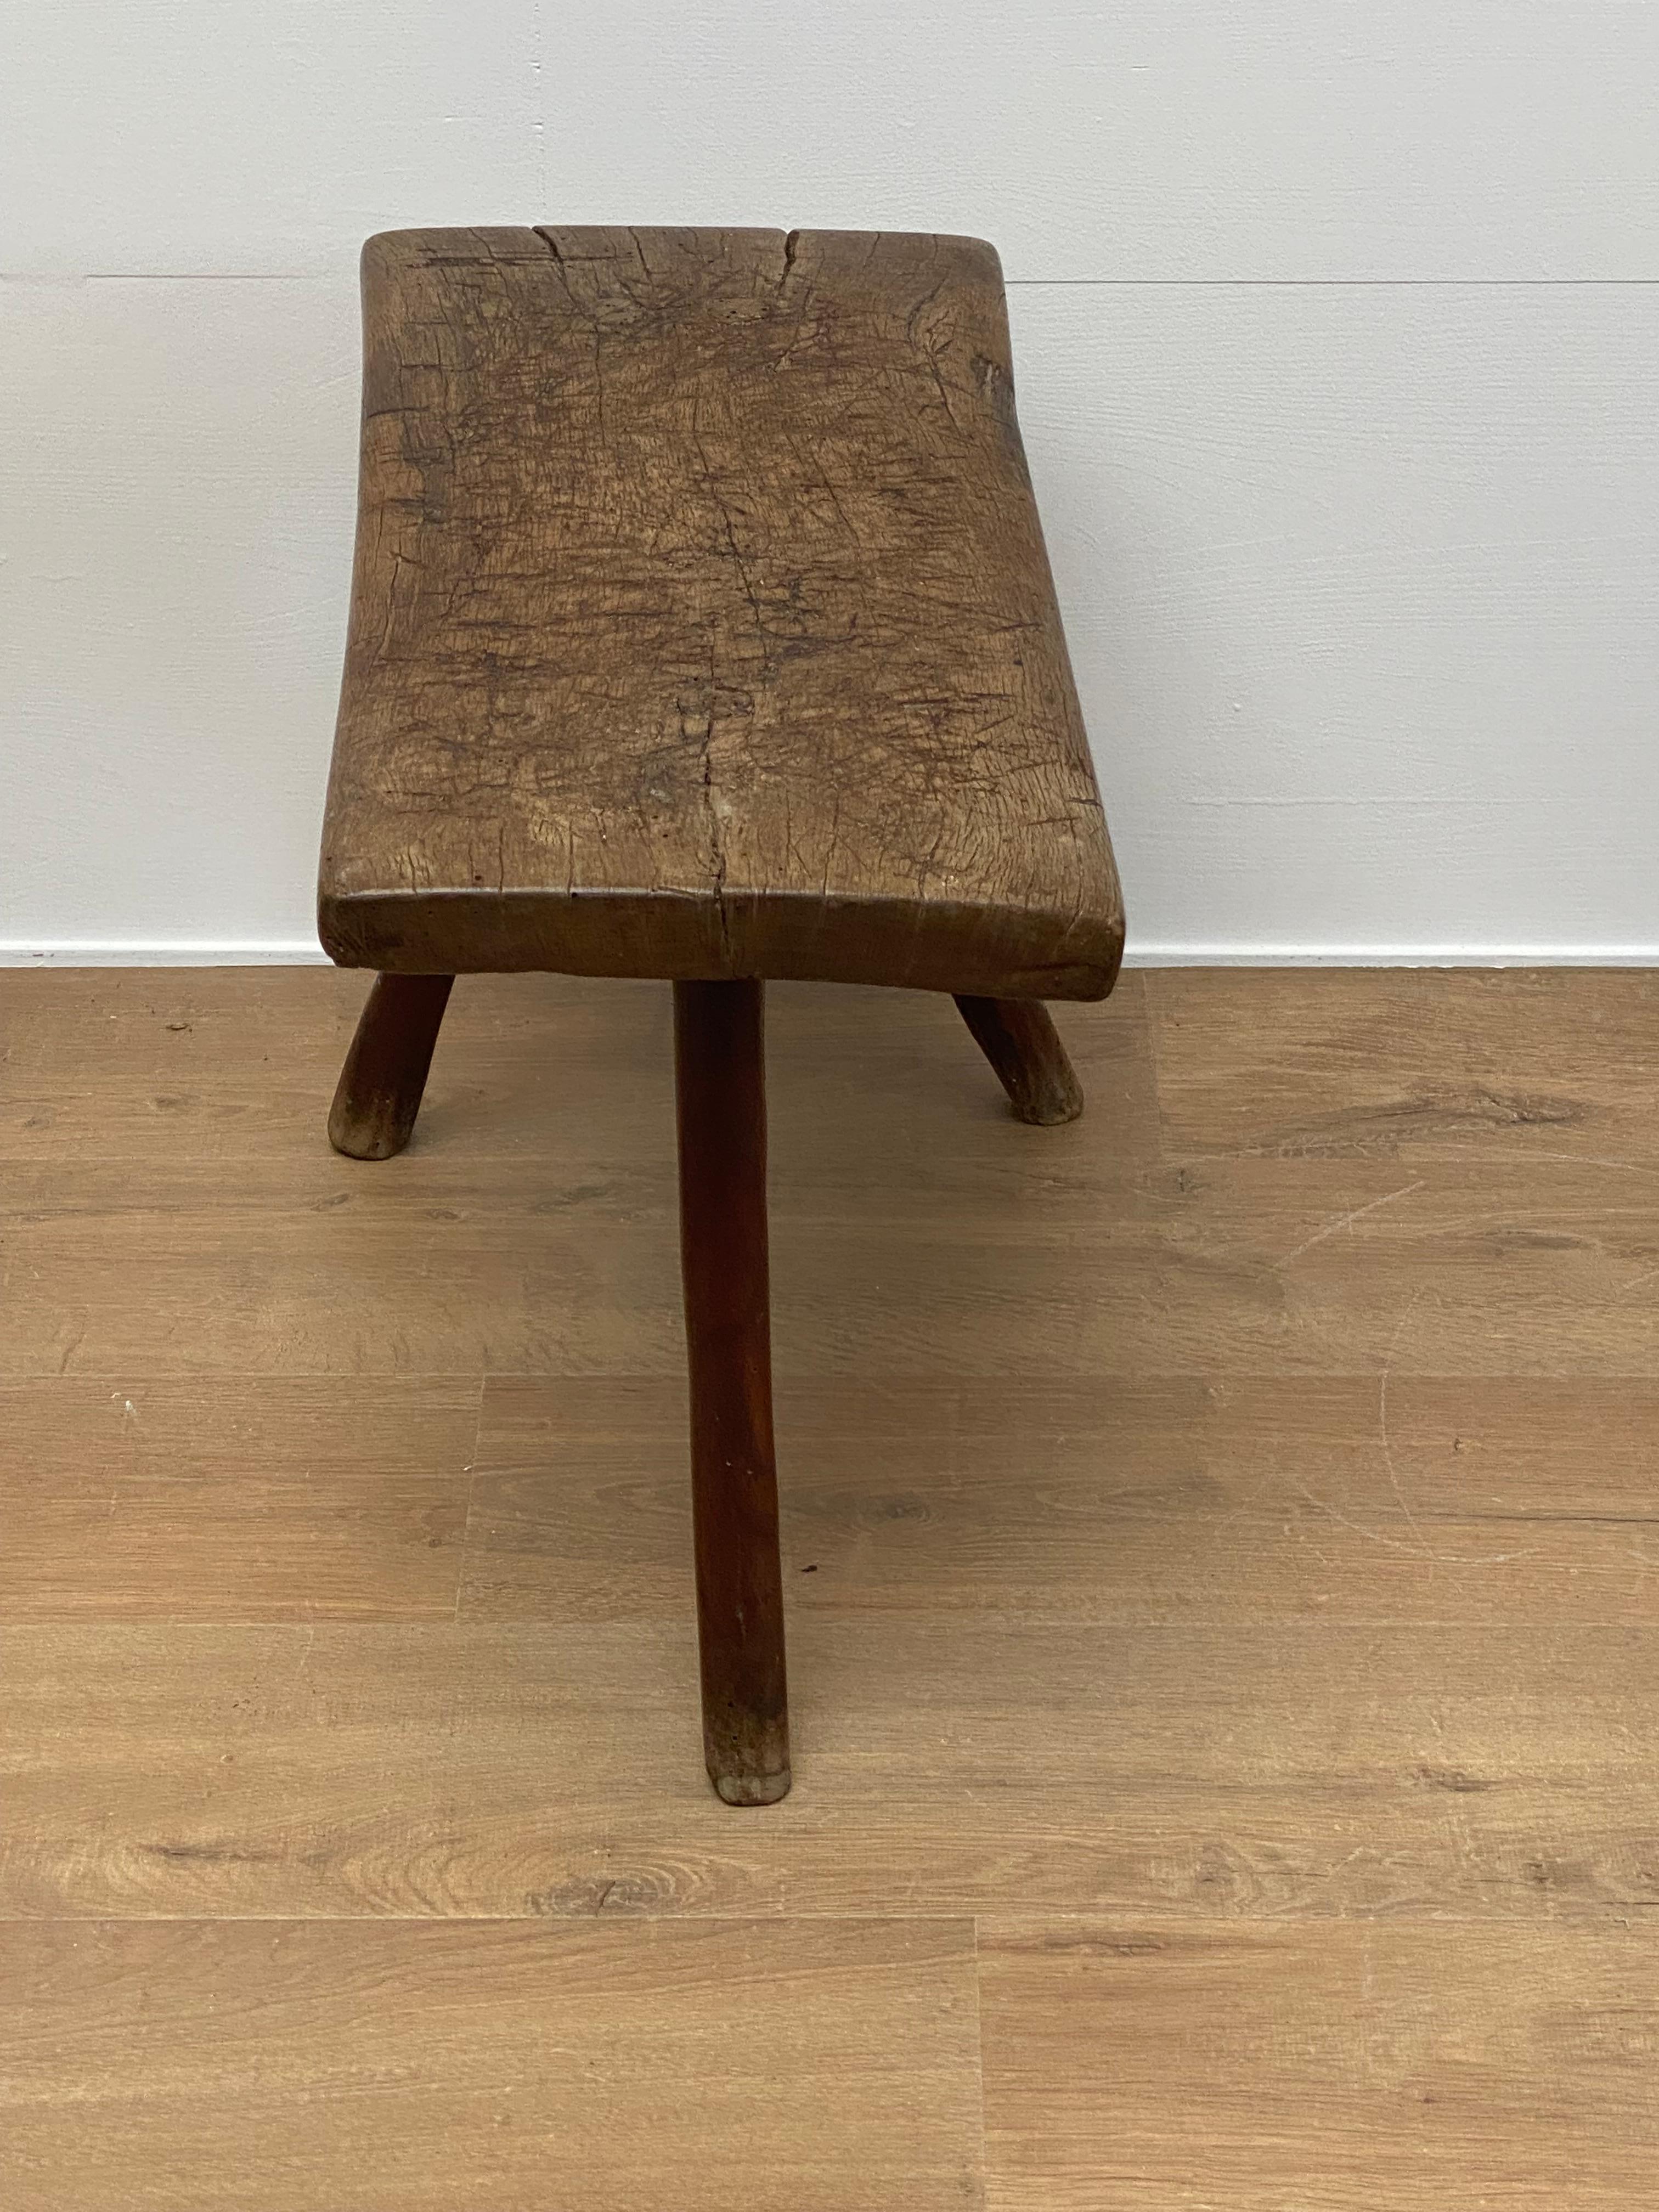 Patinated Wabi Sabi Wooden Footstool, Tabouret from Spain